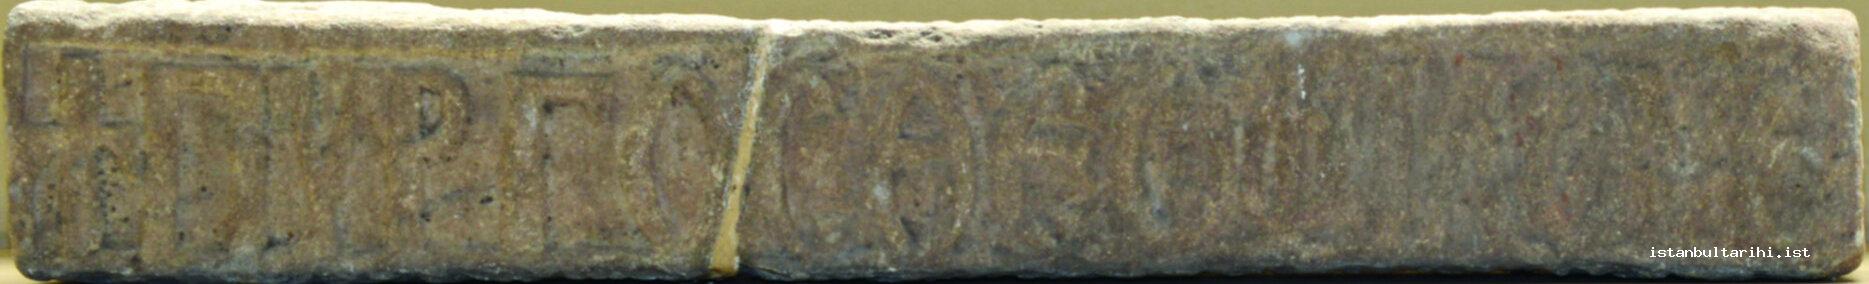 15- Emperor Theofilos’ epigraph for the restoration of sea walls (9<sup>th</sup> century) (Istanbul Archeology Museum)